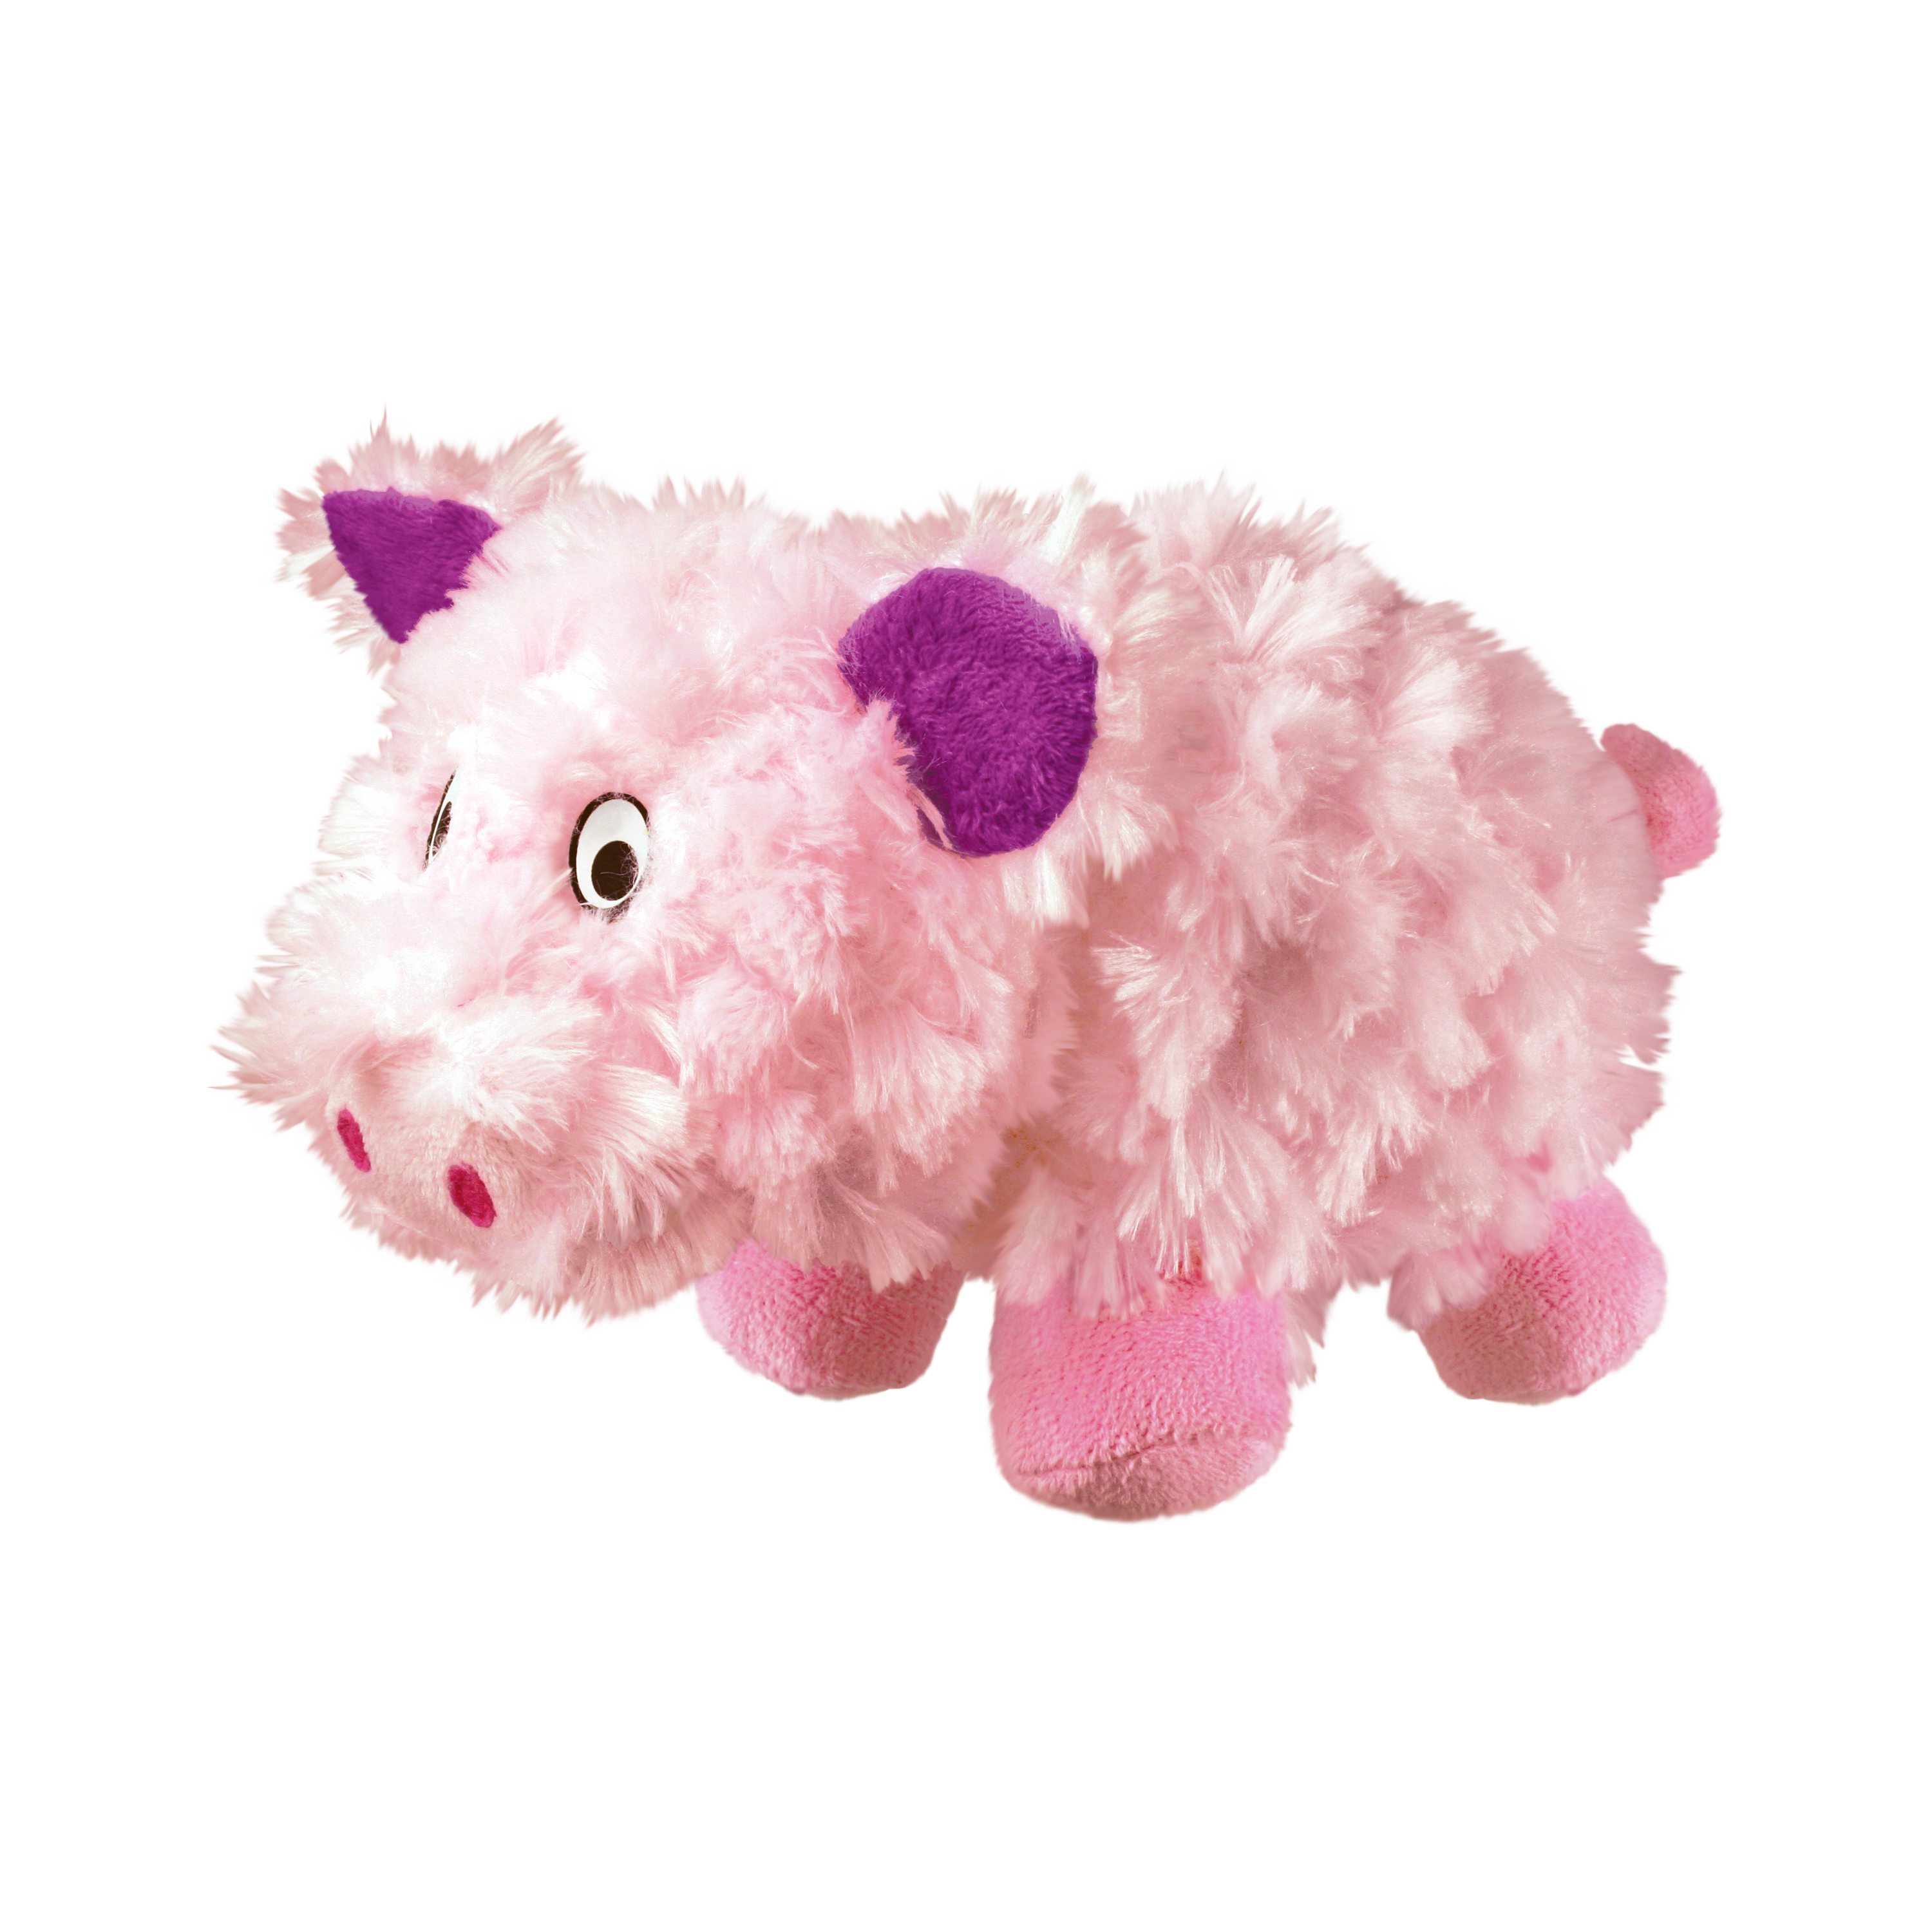 Cruncheez Barnyard Pig offpack product image